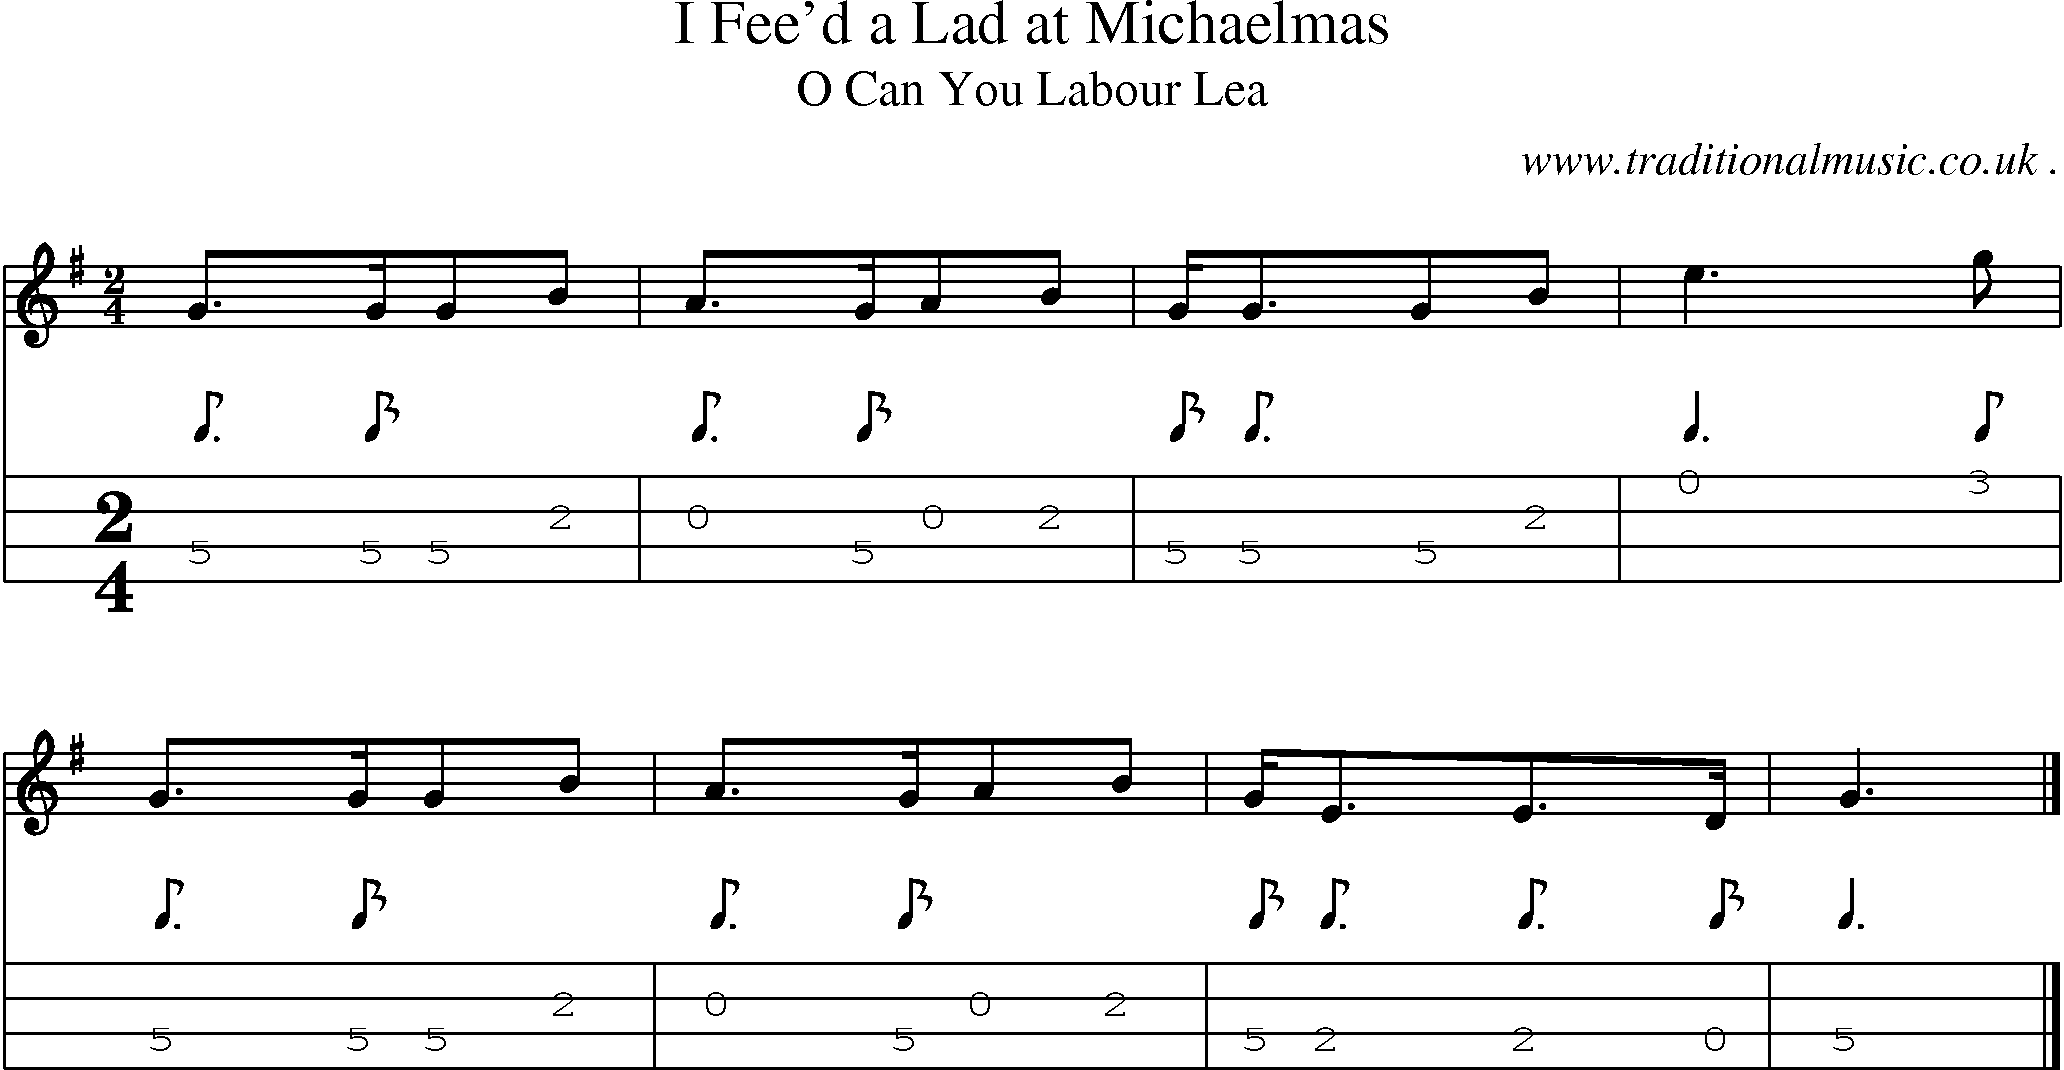 Sheet-music  score, Chords and Mandolin Tabs for I Feed A Lad At Michaelmas